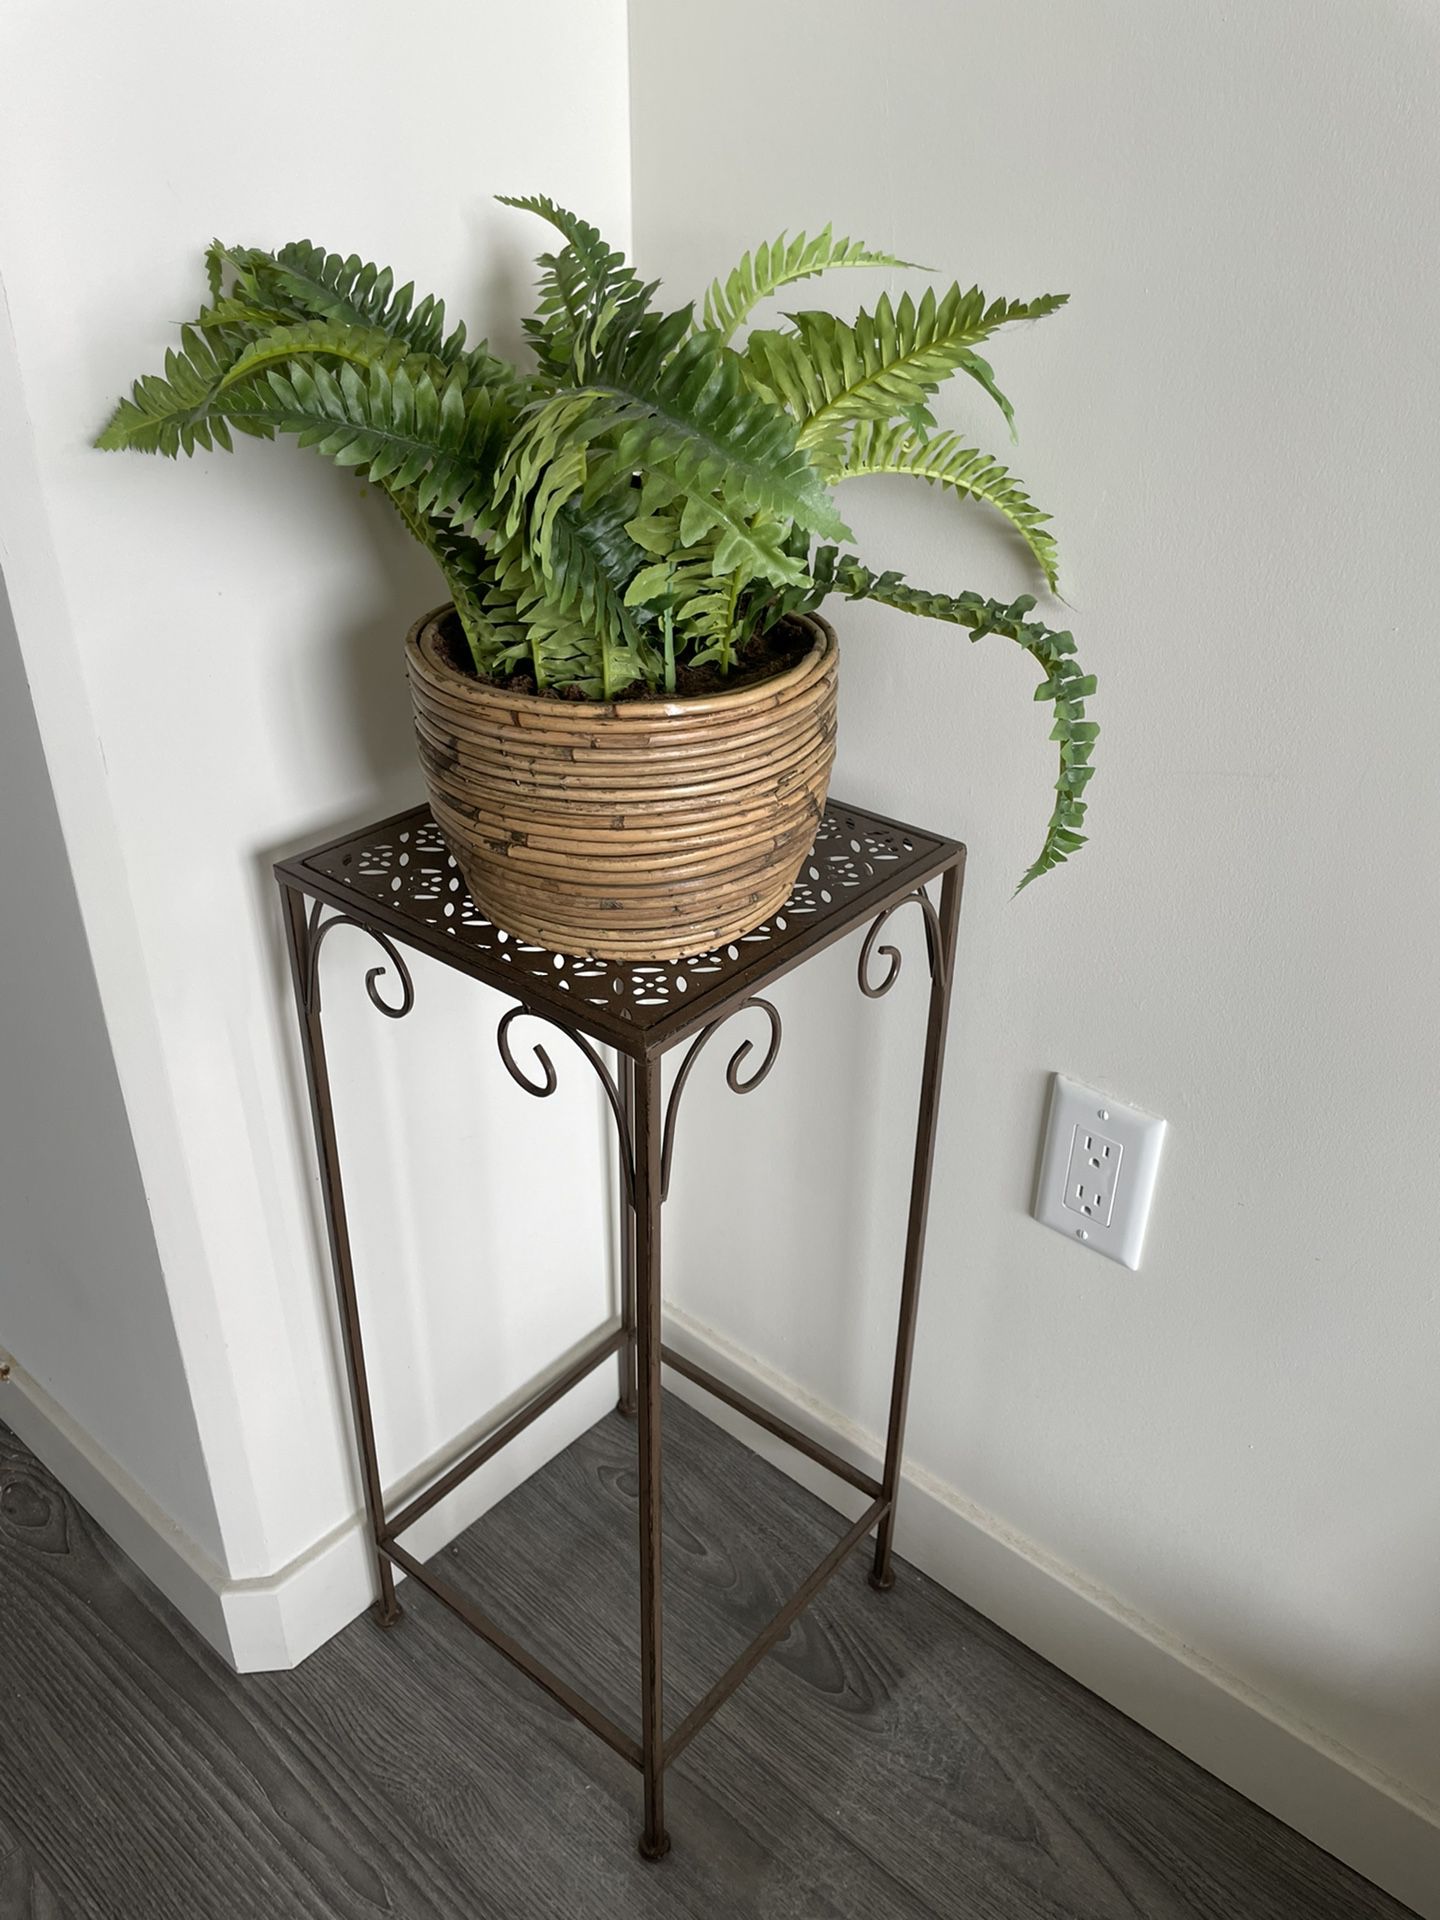 Plant And Stand For Room Decor 